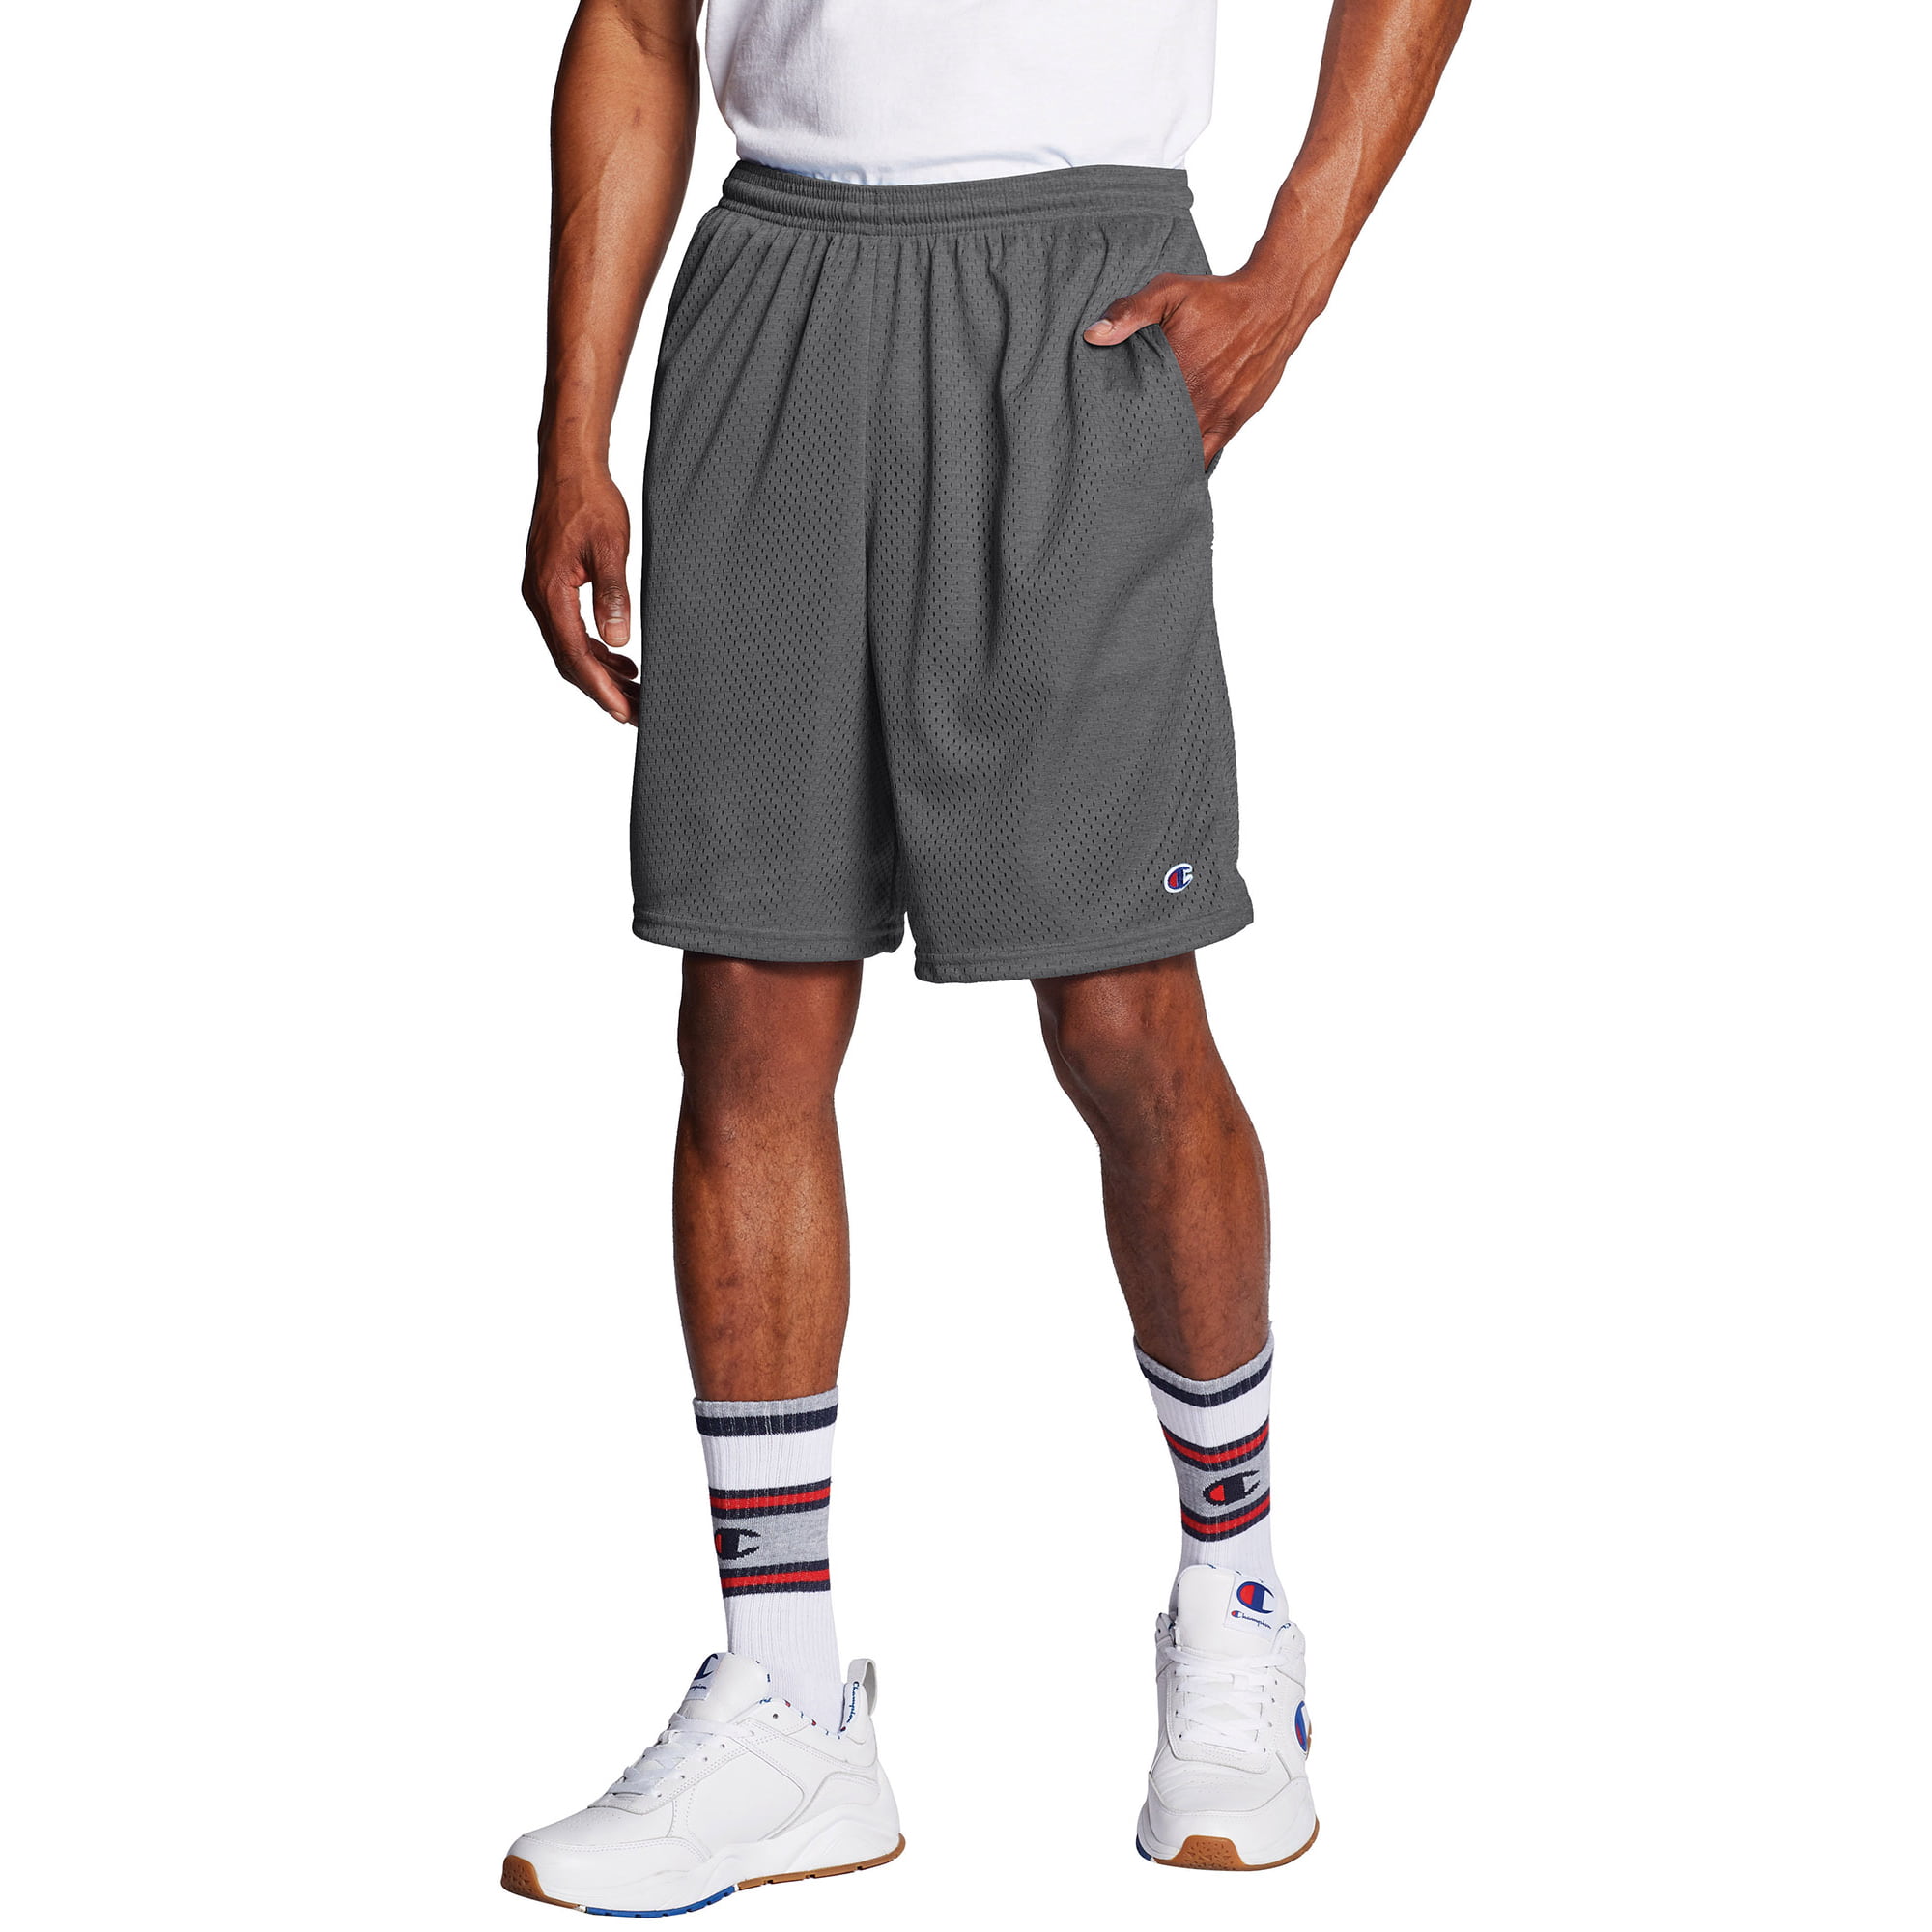 lærling Assimilate bjerg Champion Men's Long Mesh 9" Shorts with Pockets, up to Size 4XL -  Walmart.com